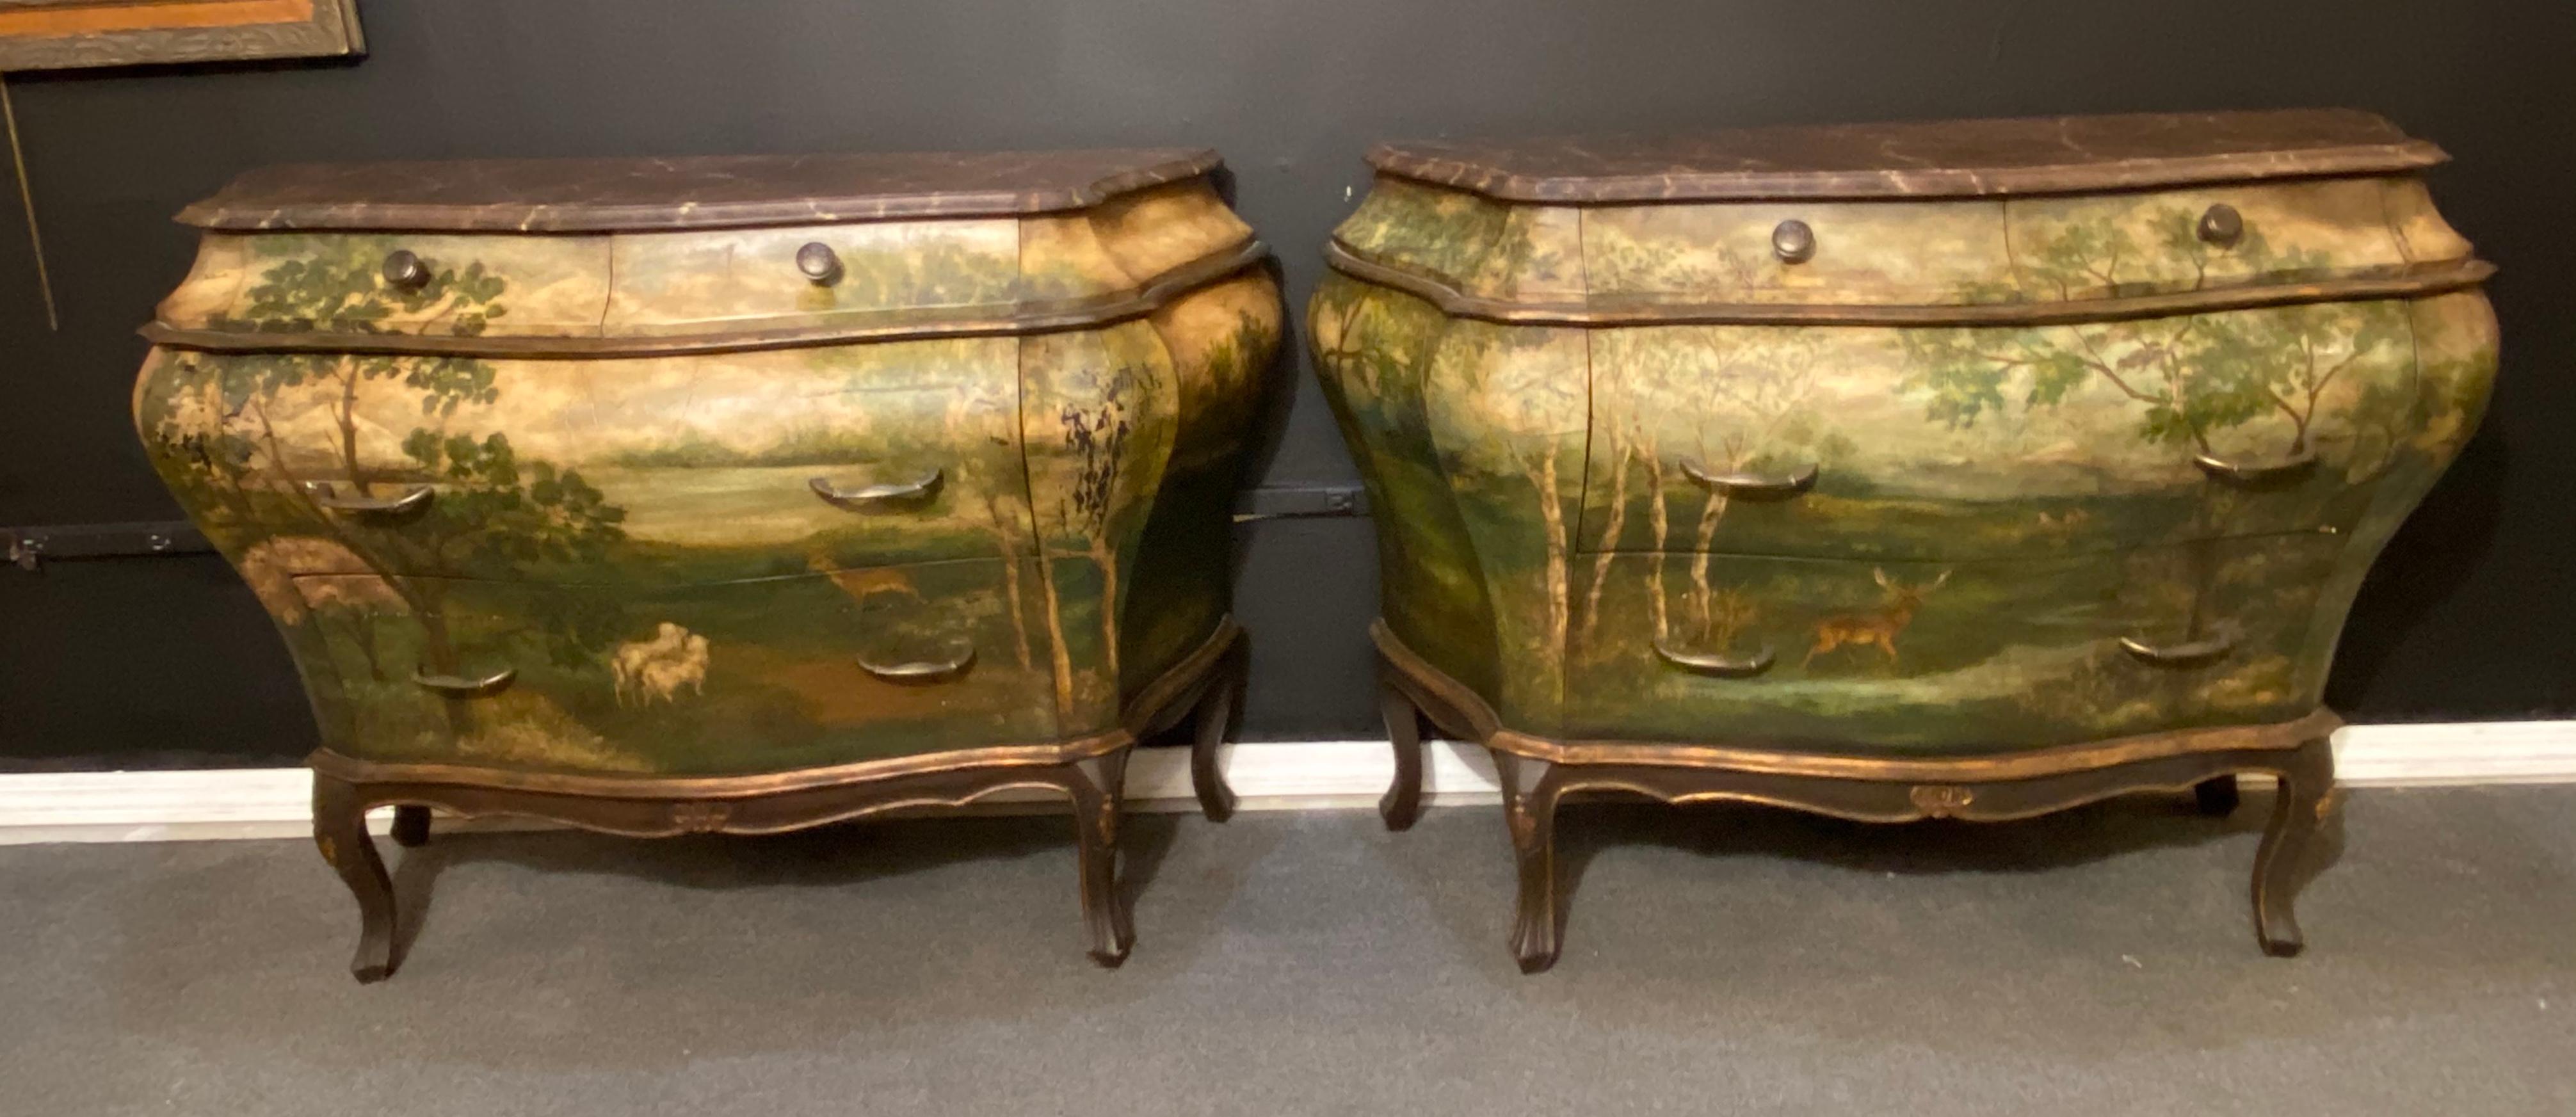 Louis XVI Pair of Italian Painted Faux Marble-Top Bombay Commodes or Nightstands